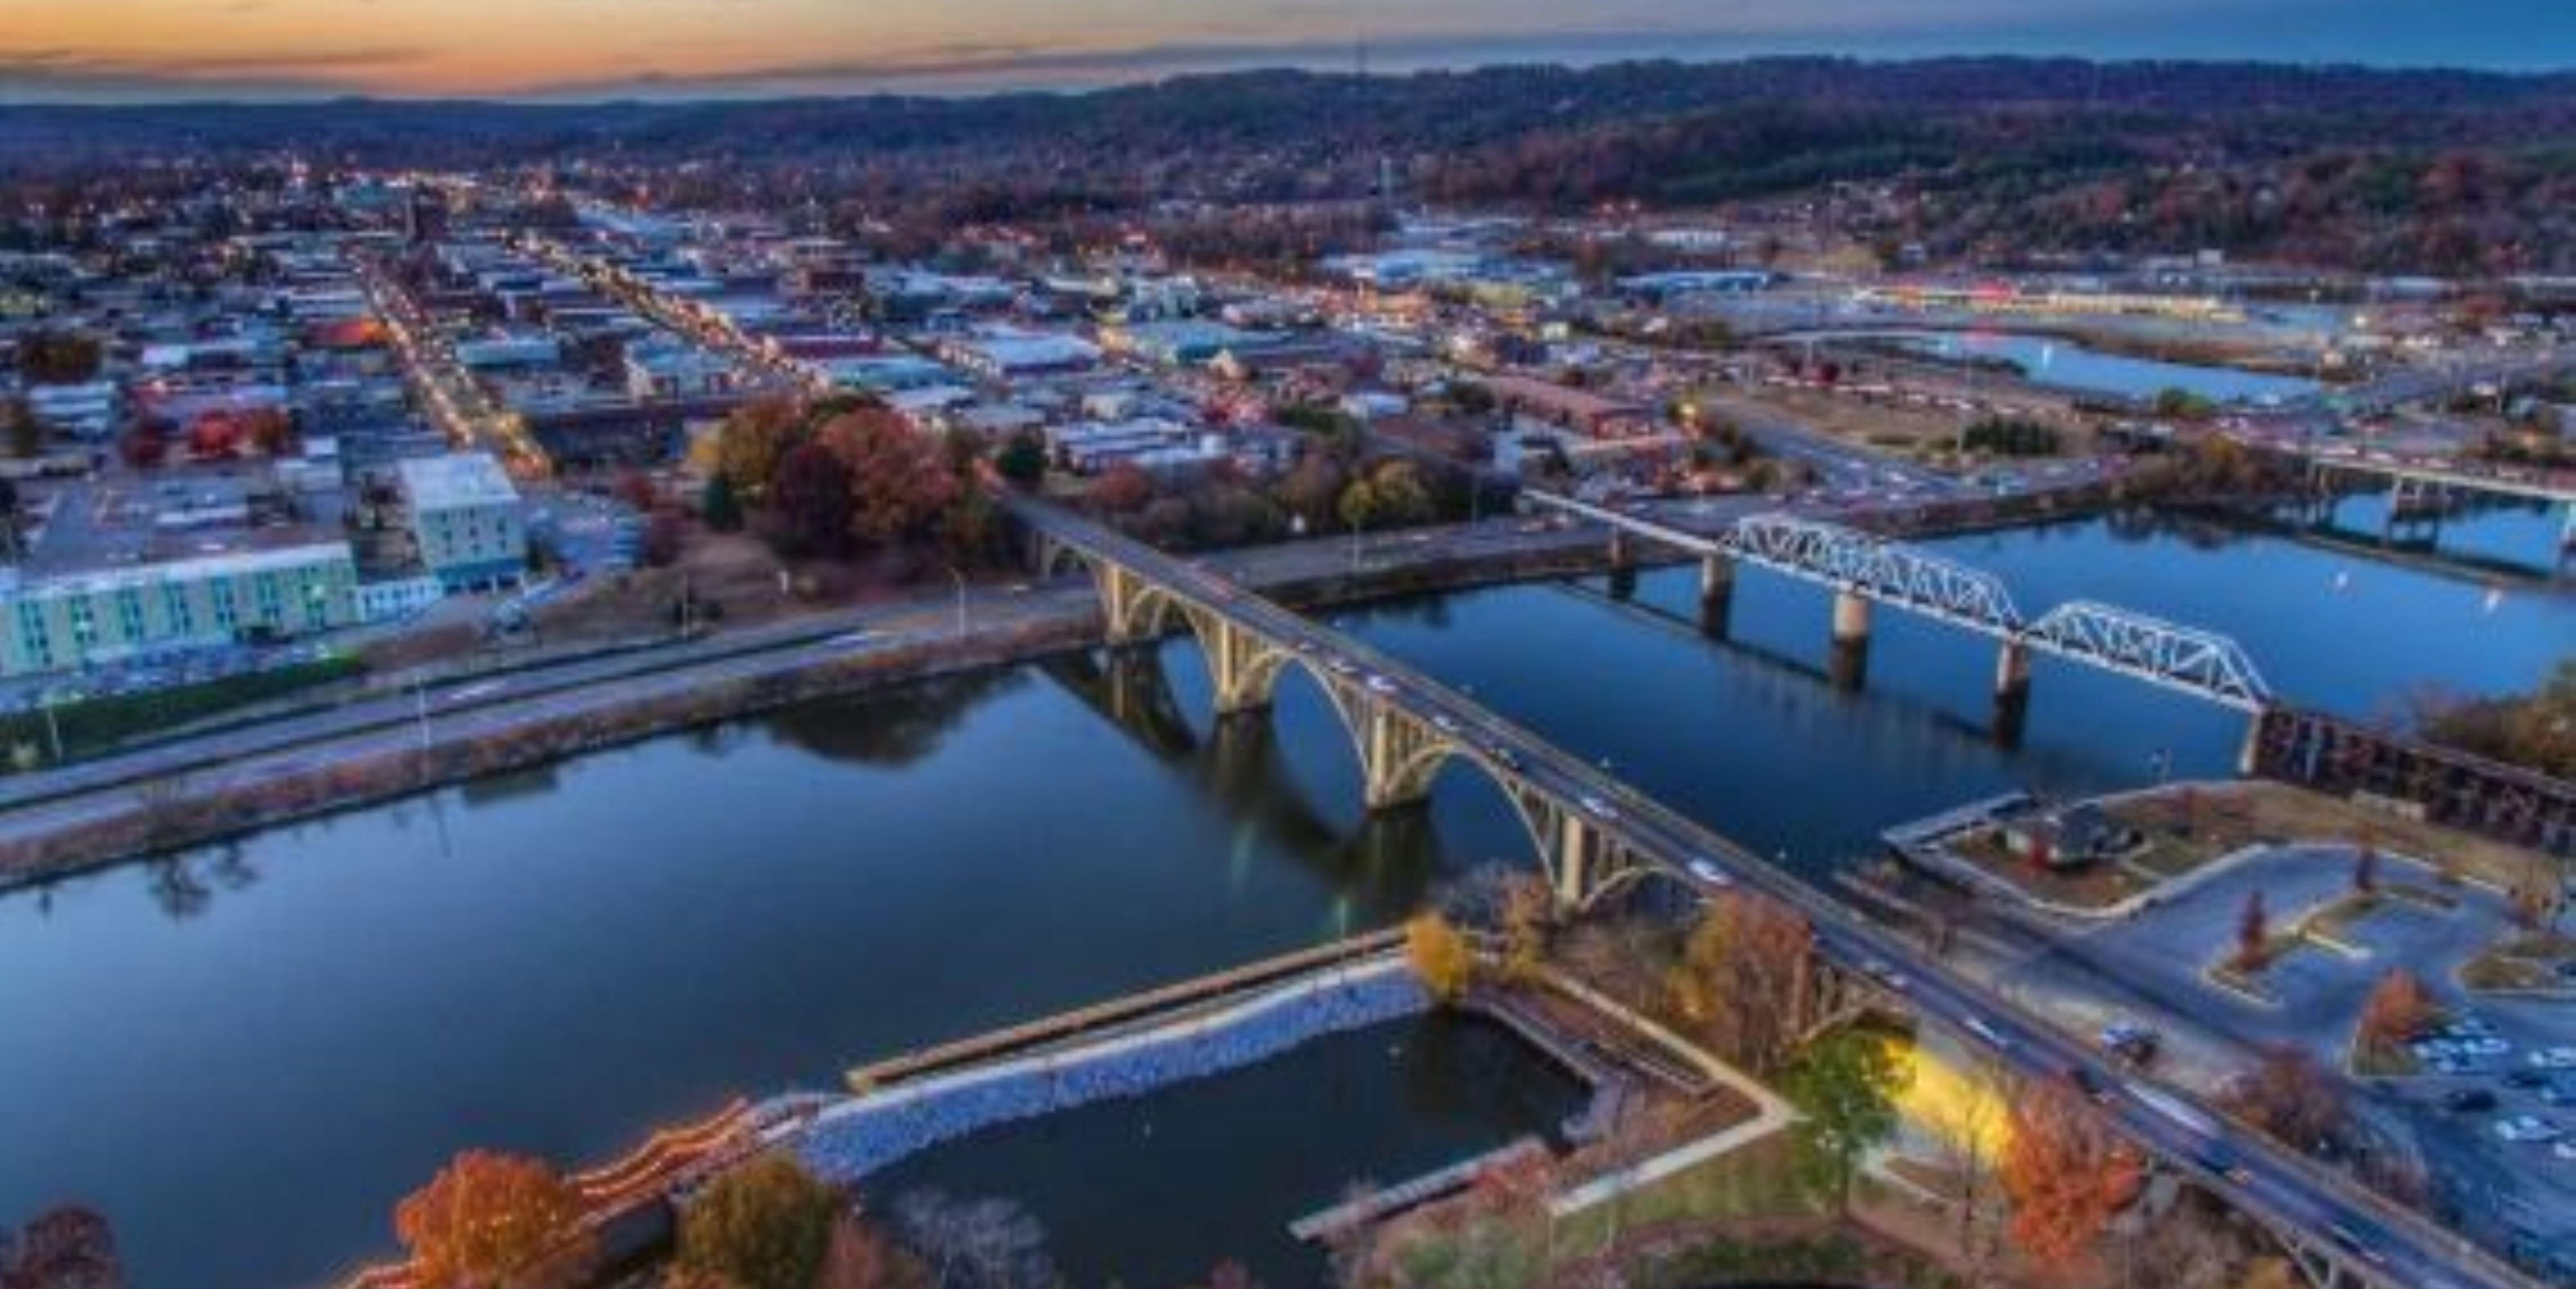 The charming city of Gadsden lies in the foothills of the Appalachian Mountains along the banks of the Coosa River.  The historic downtown area is lined with boutique shopping, unique restaurants, and nightlife. During the day, visitors enjoy outdoor activities like hiking, biking, and fishing.  